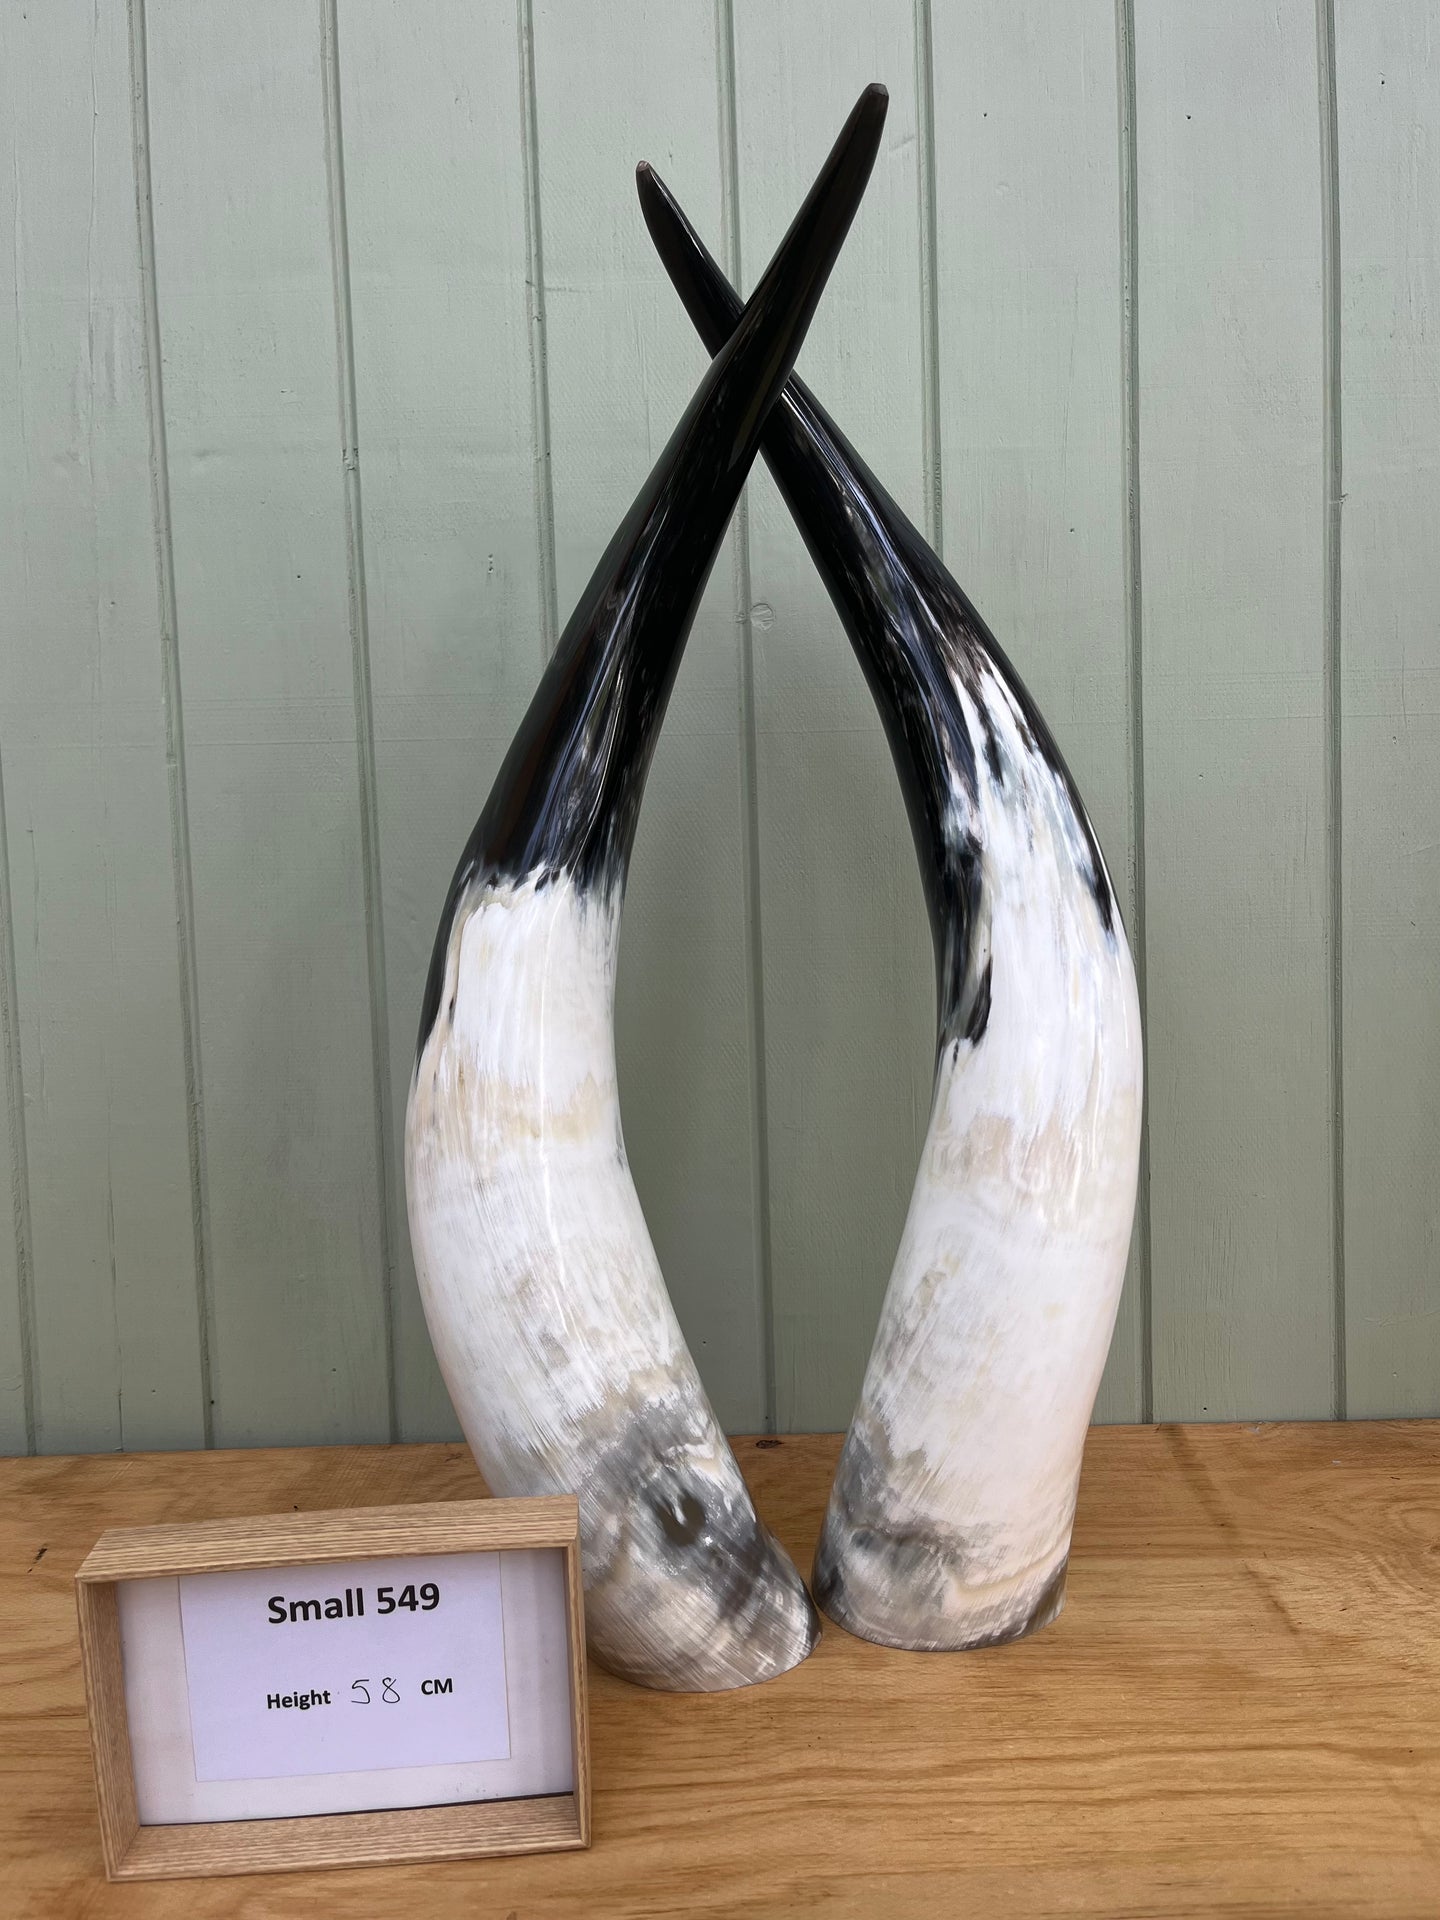 Ankole Cattle Horns - Small 549